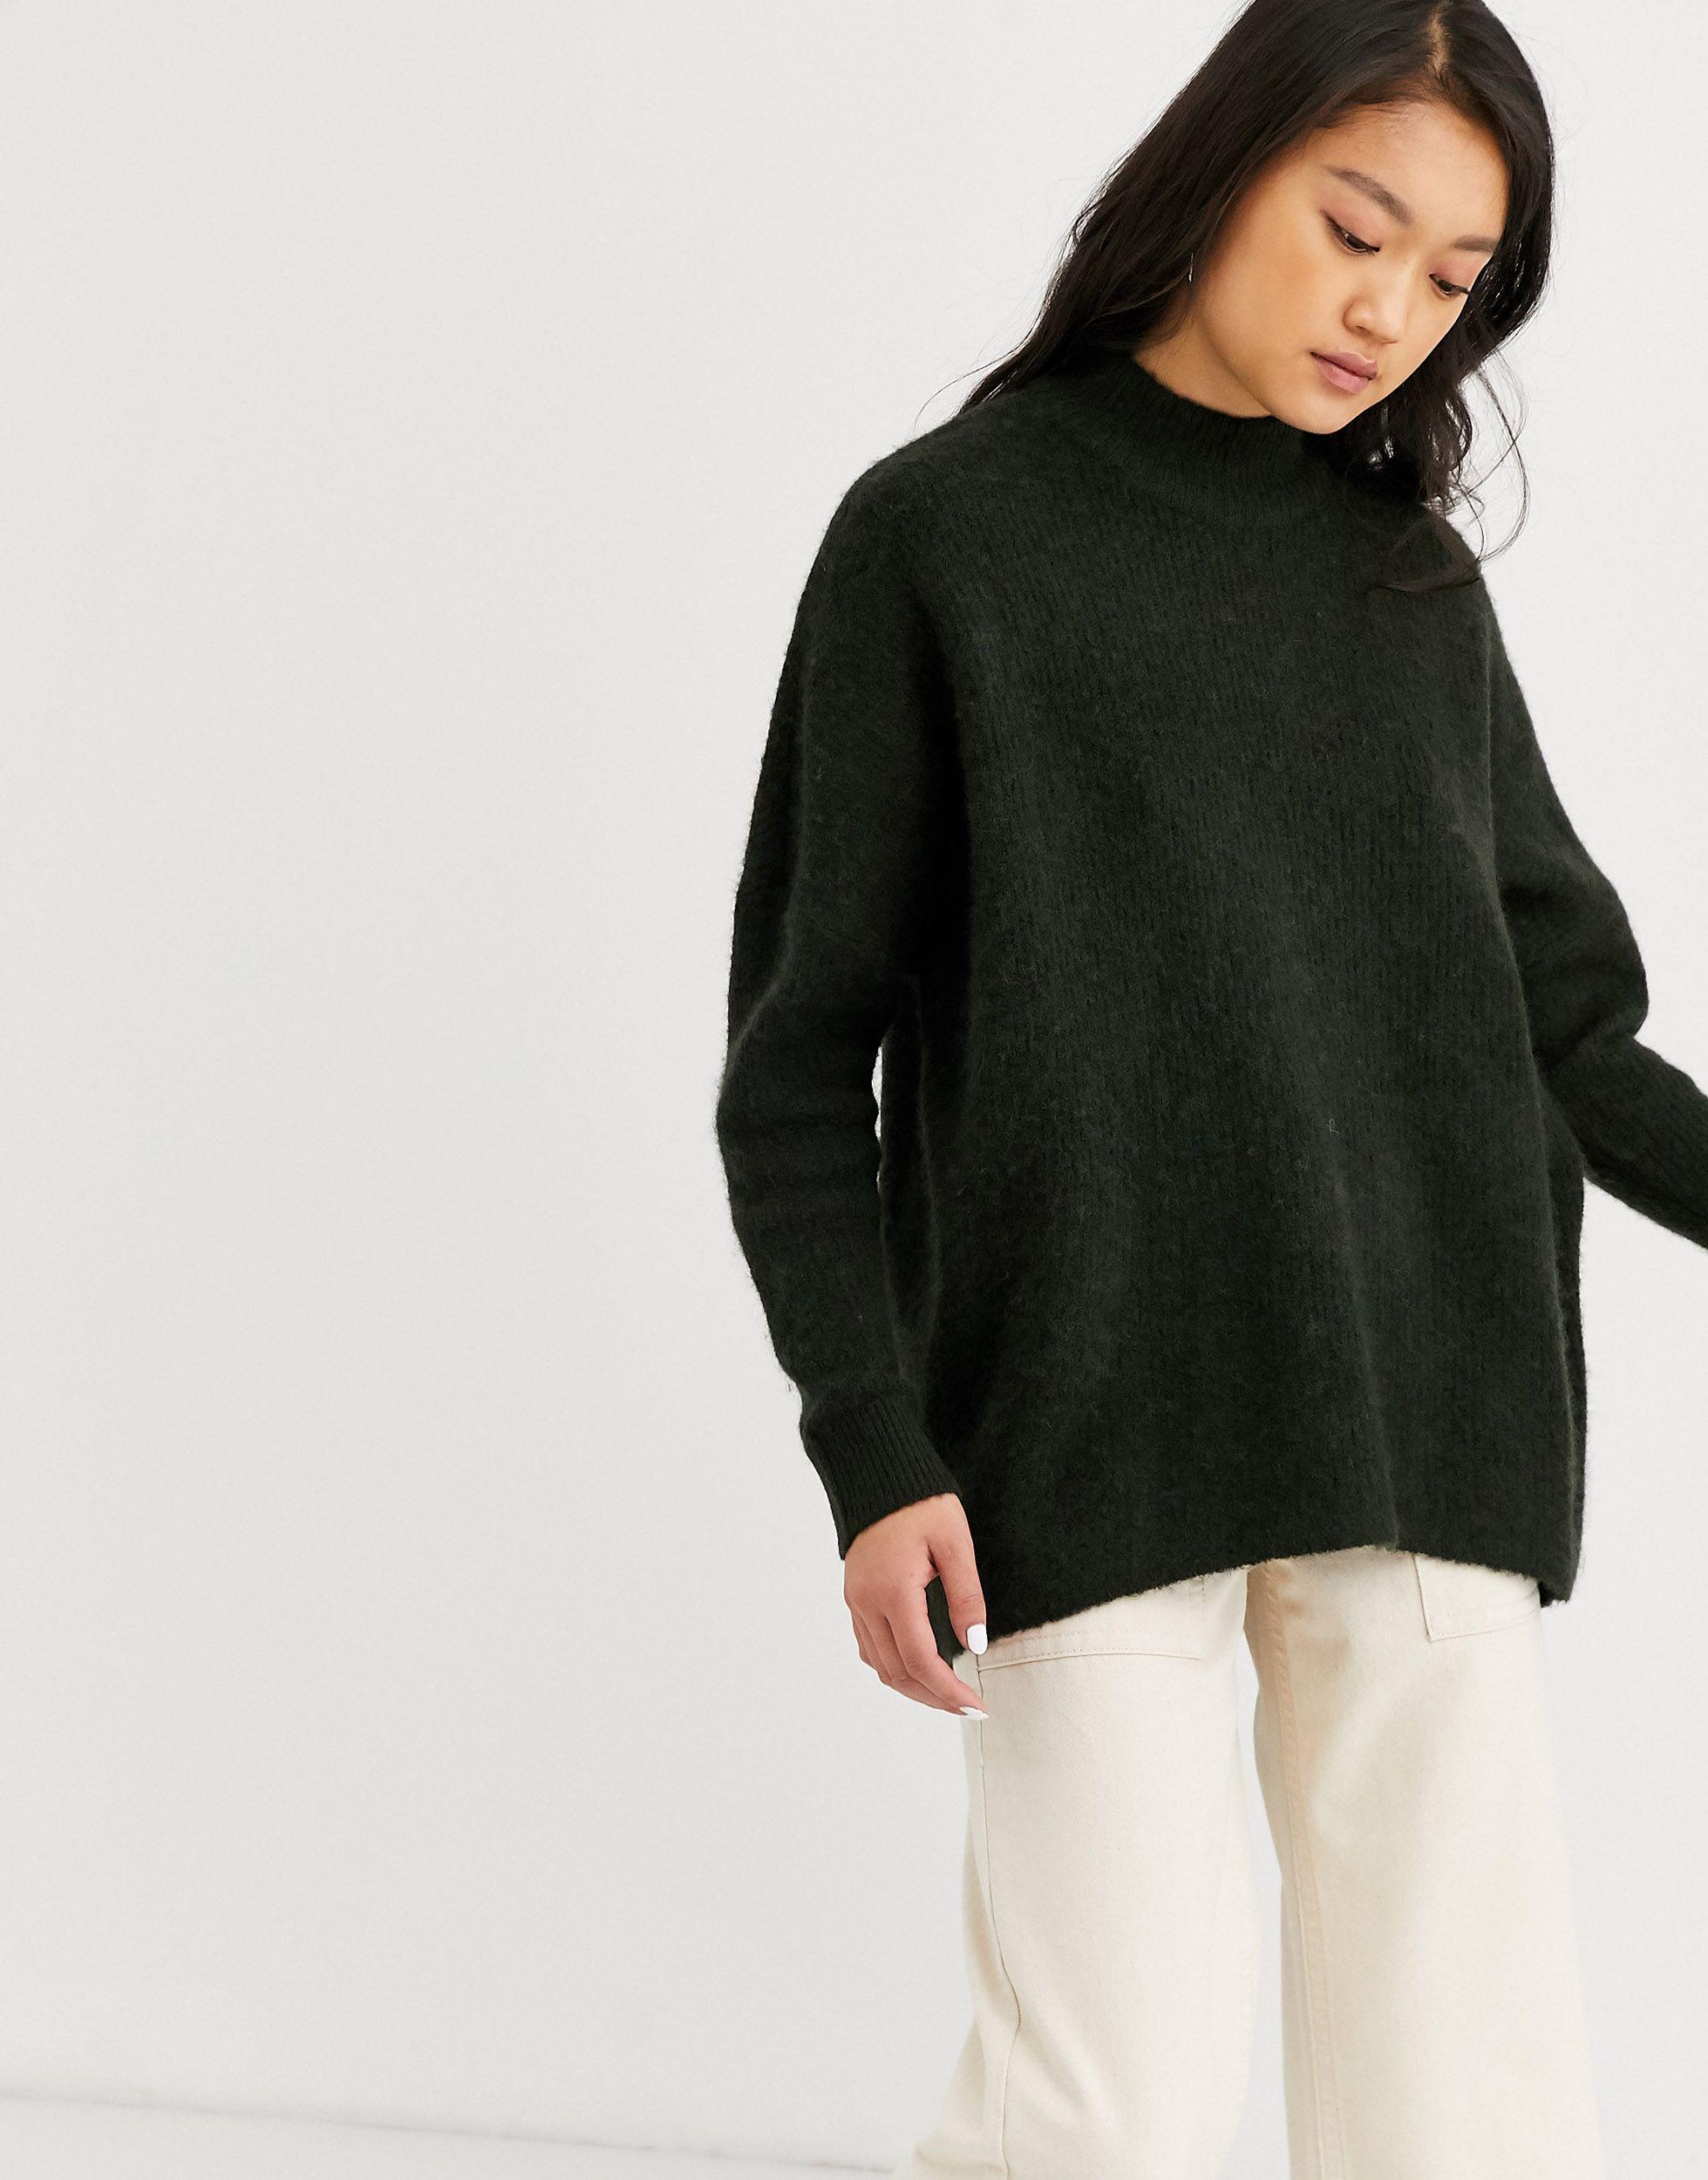 SELECTED Synthetic Femme Crew Neck Knitted Jumper-green - Lyst